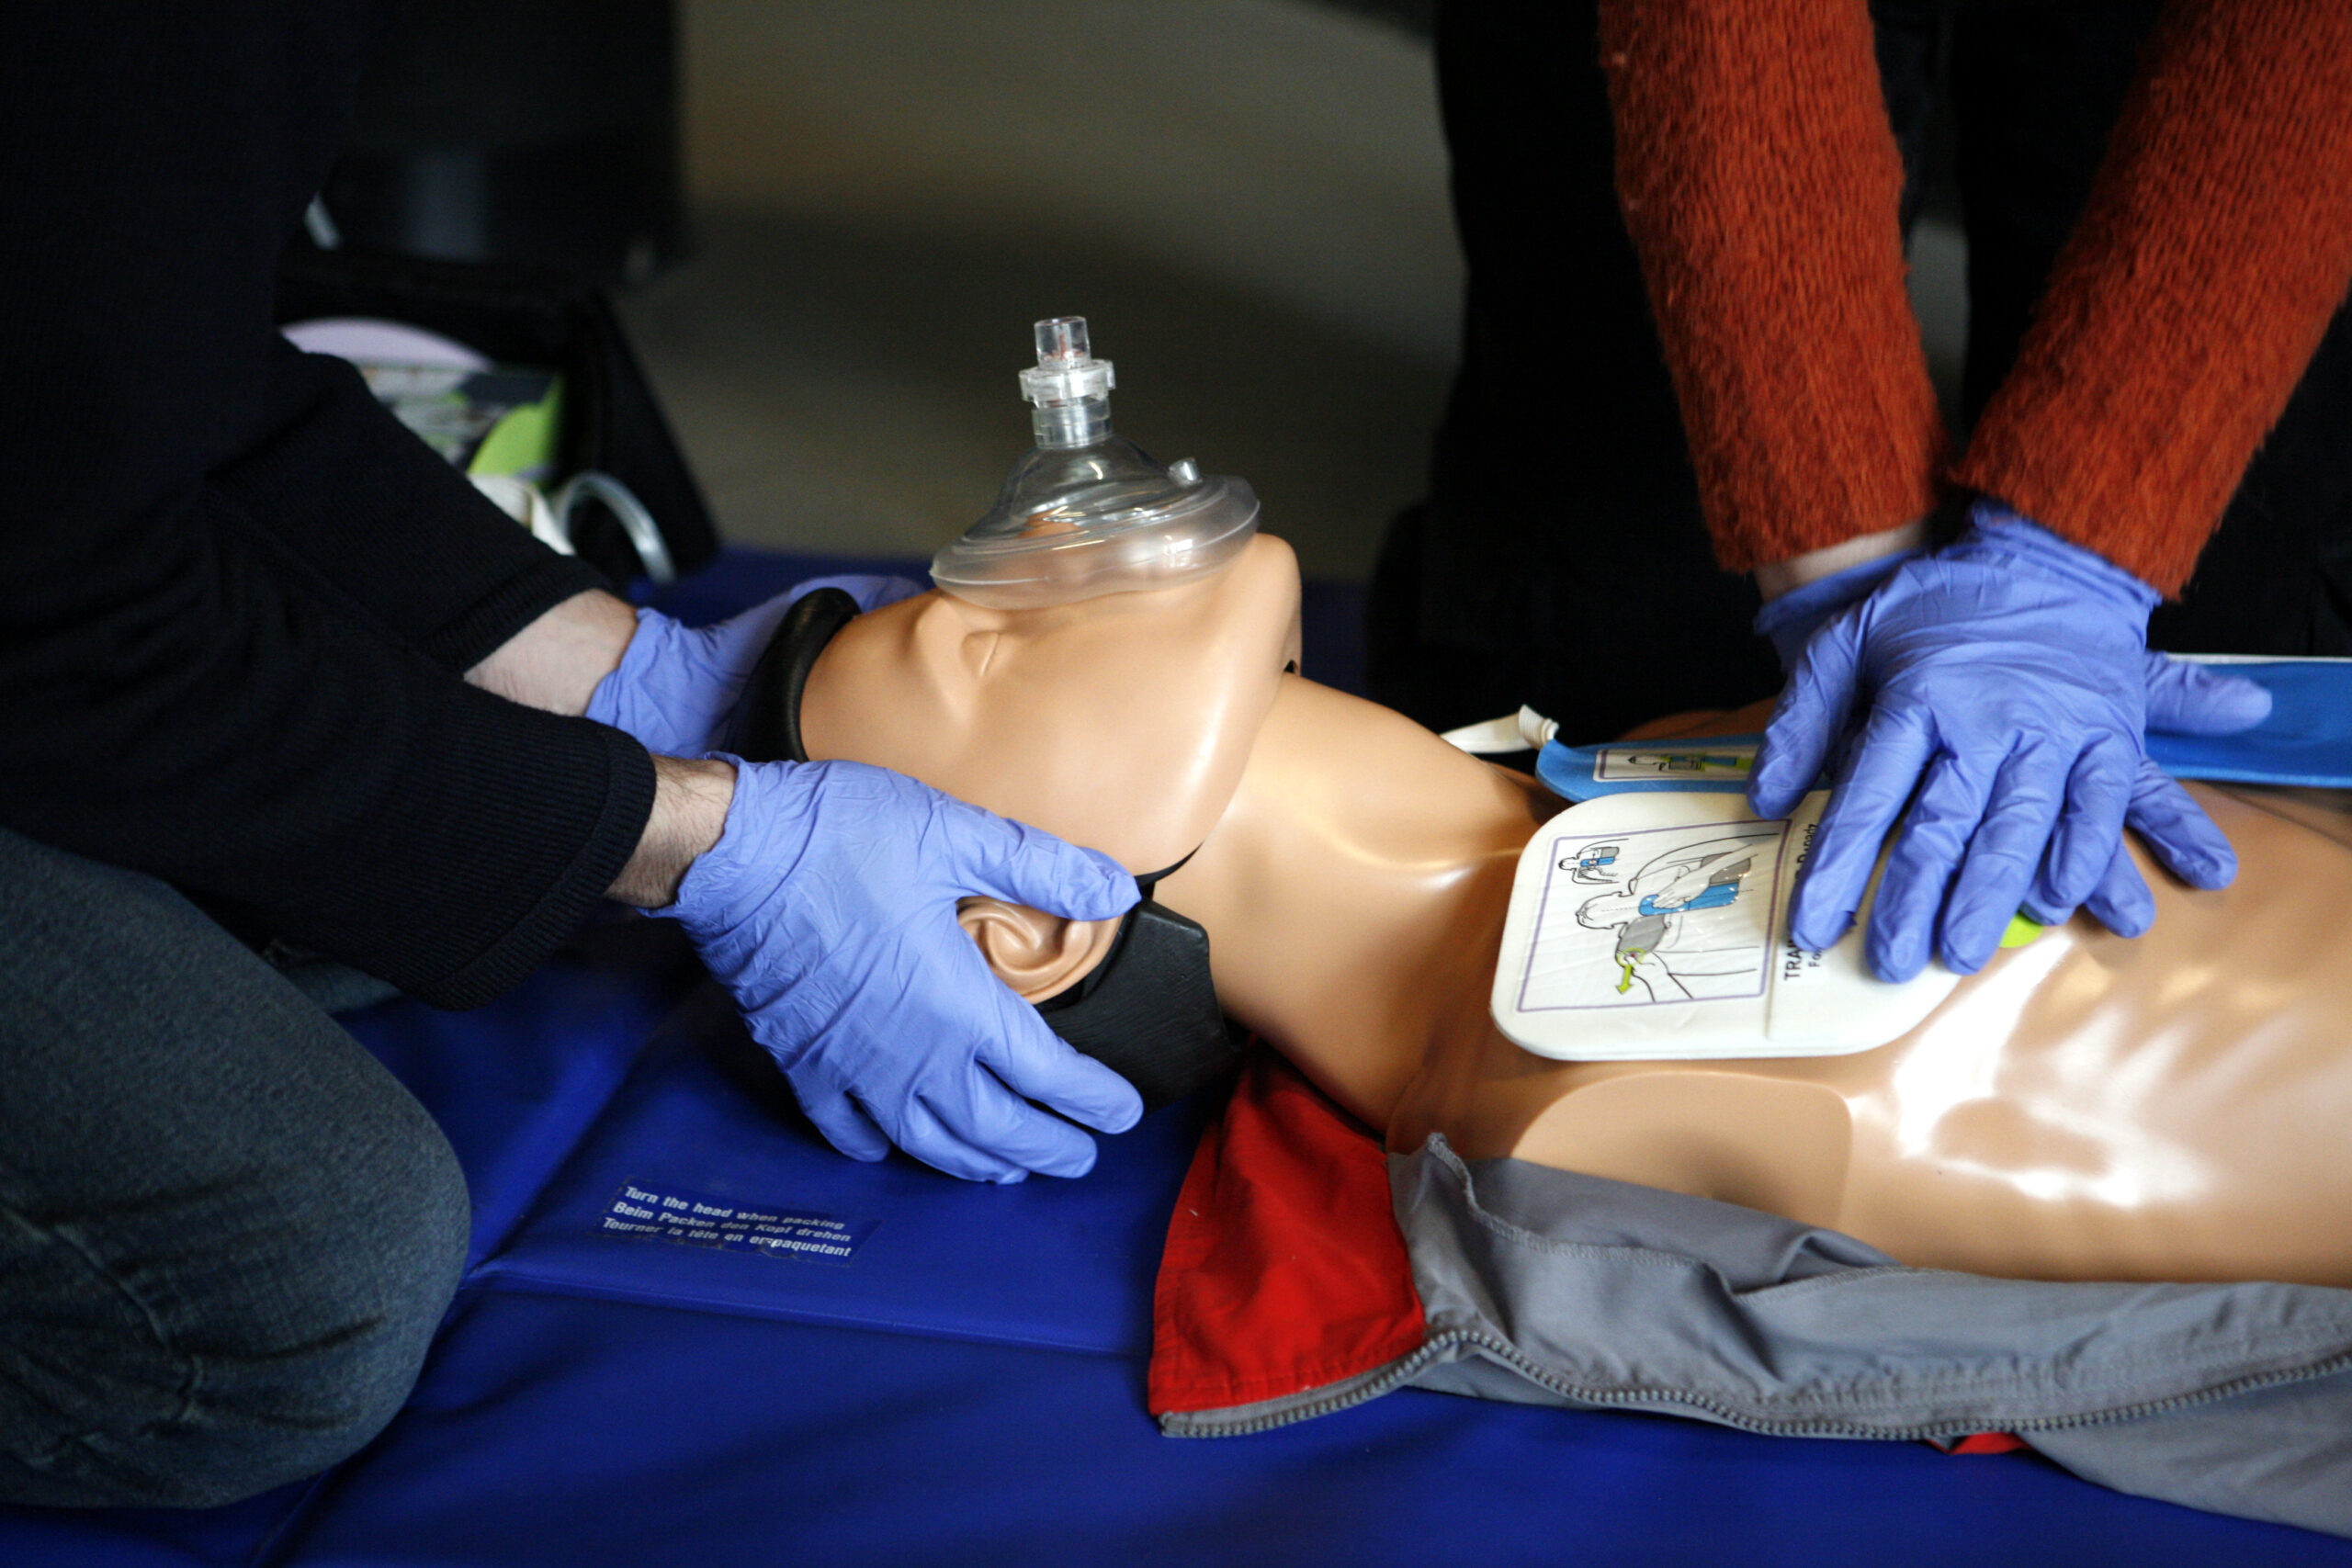 What You Need to Know about First Aid Training in CPR